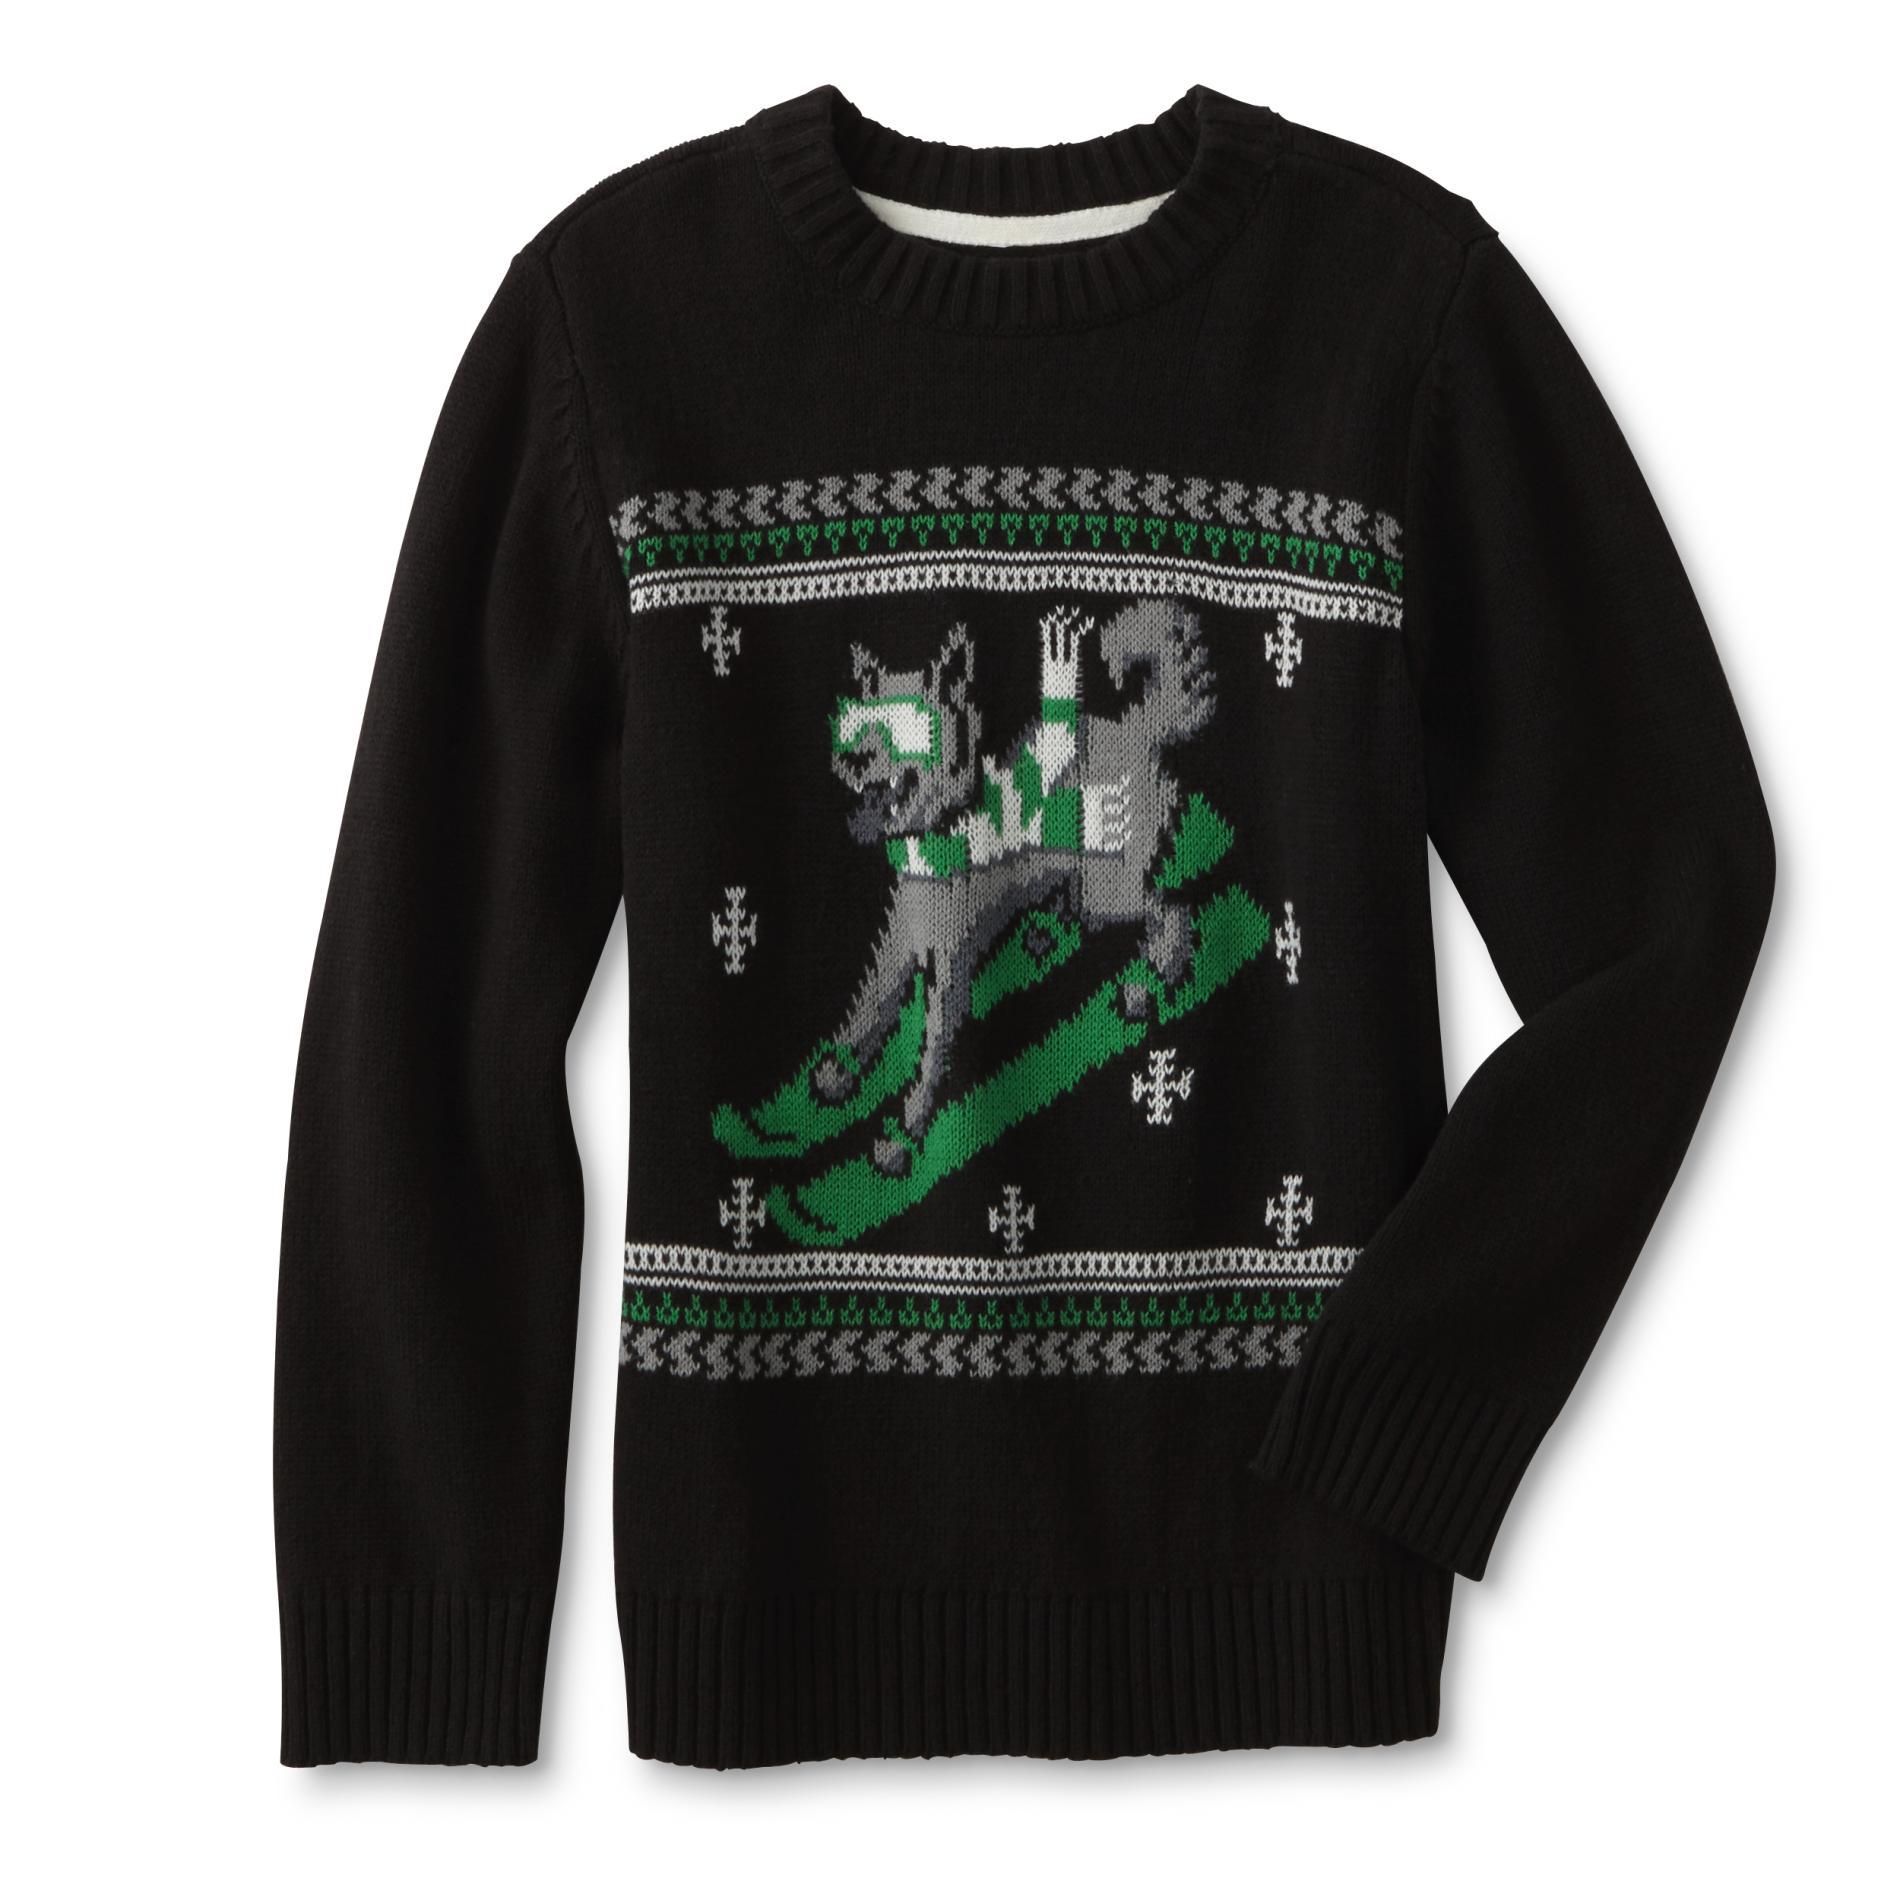 Toughskins Infant & Toddler Boy's Holiday Sweater - Skiing Wolf